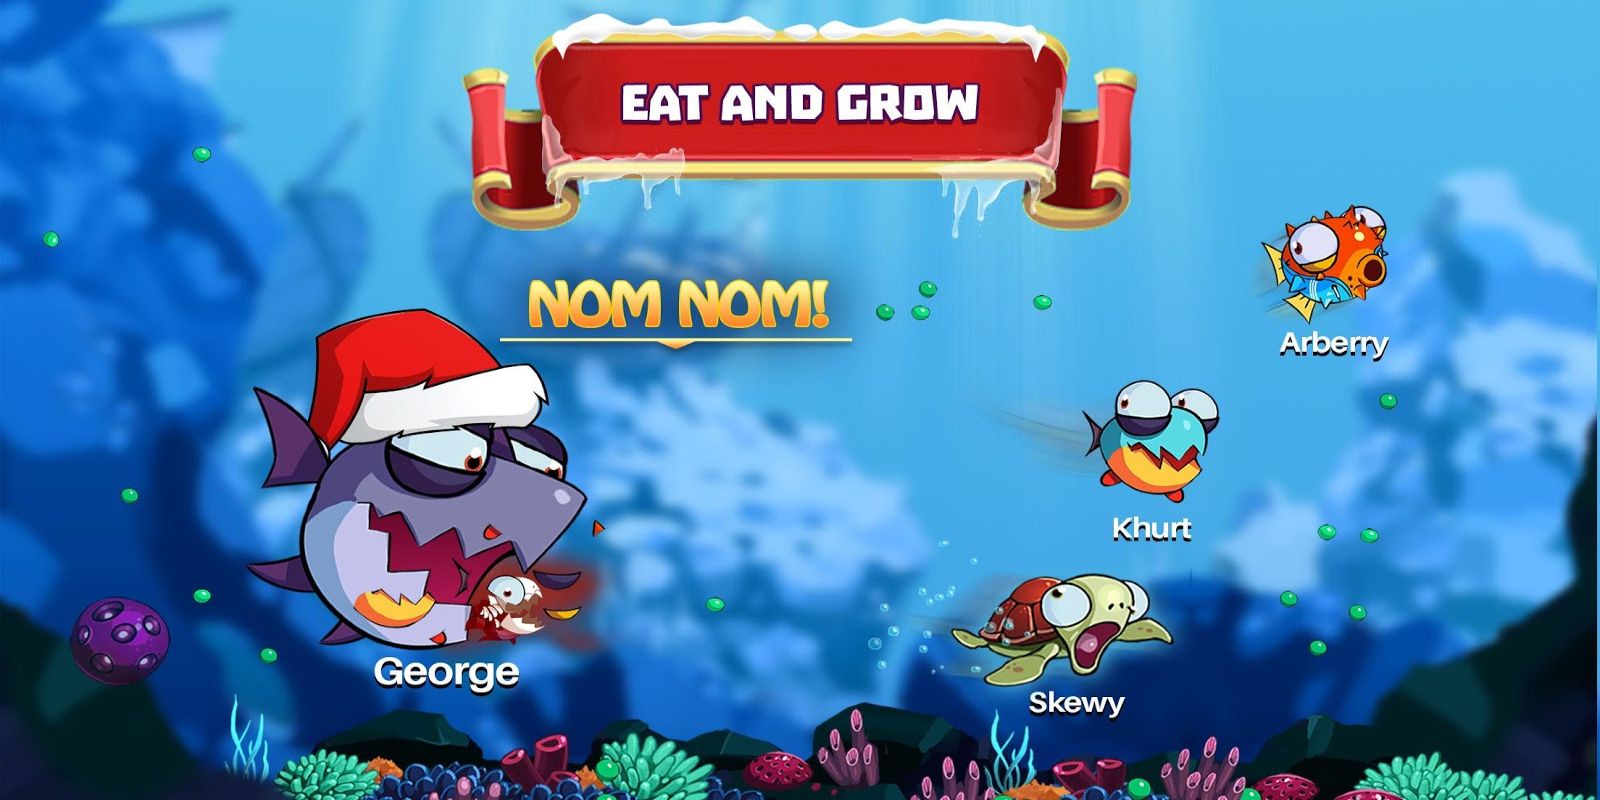 A promotional image for the game eatme.io.